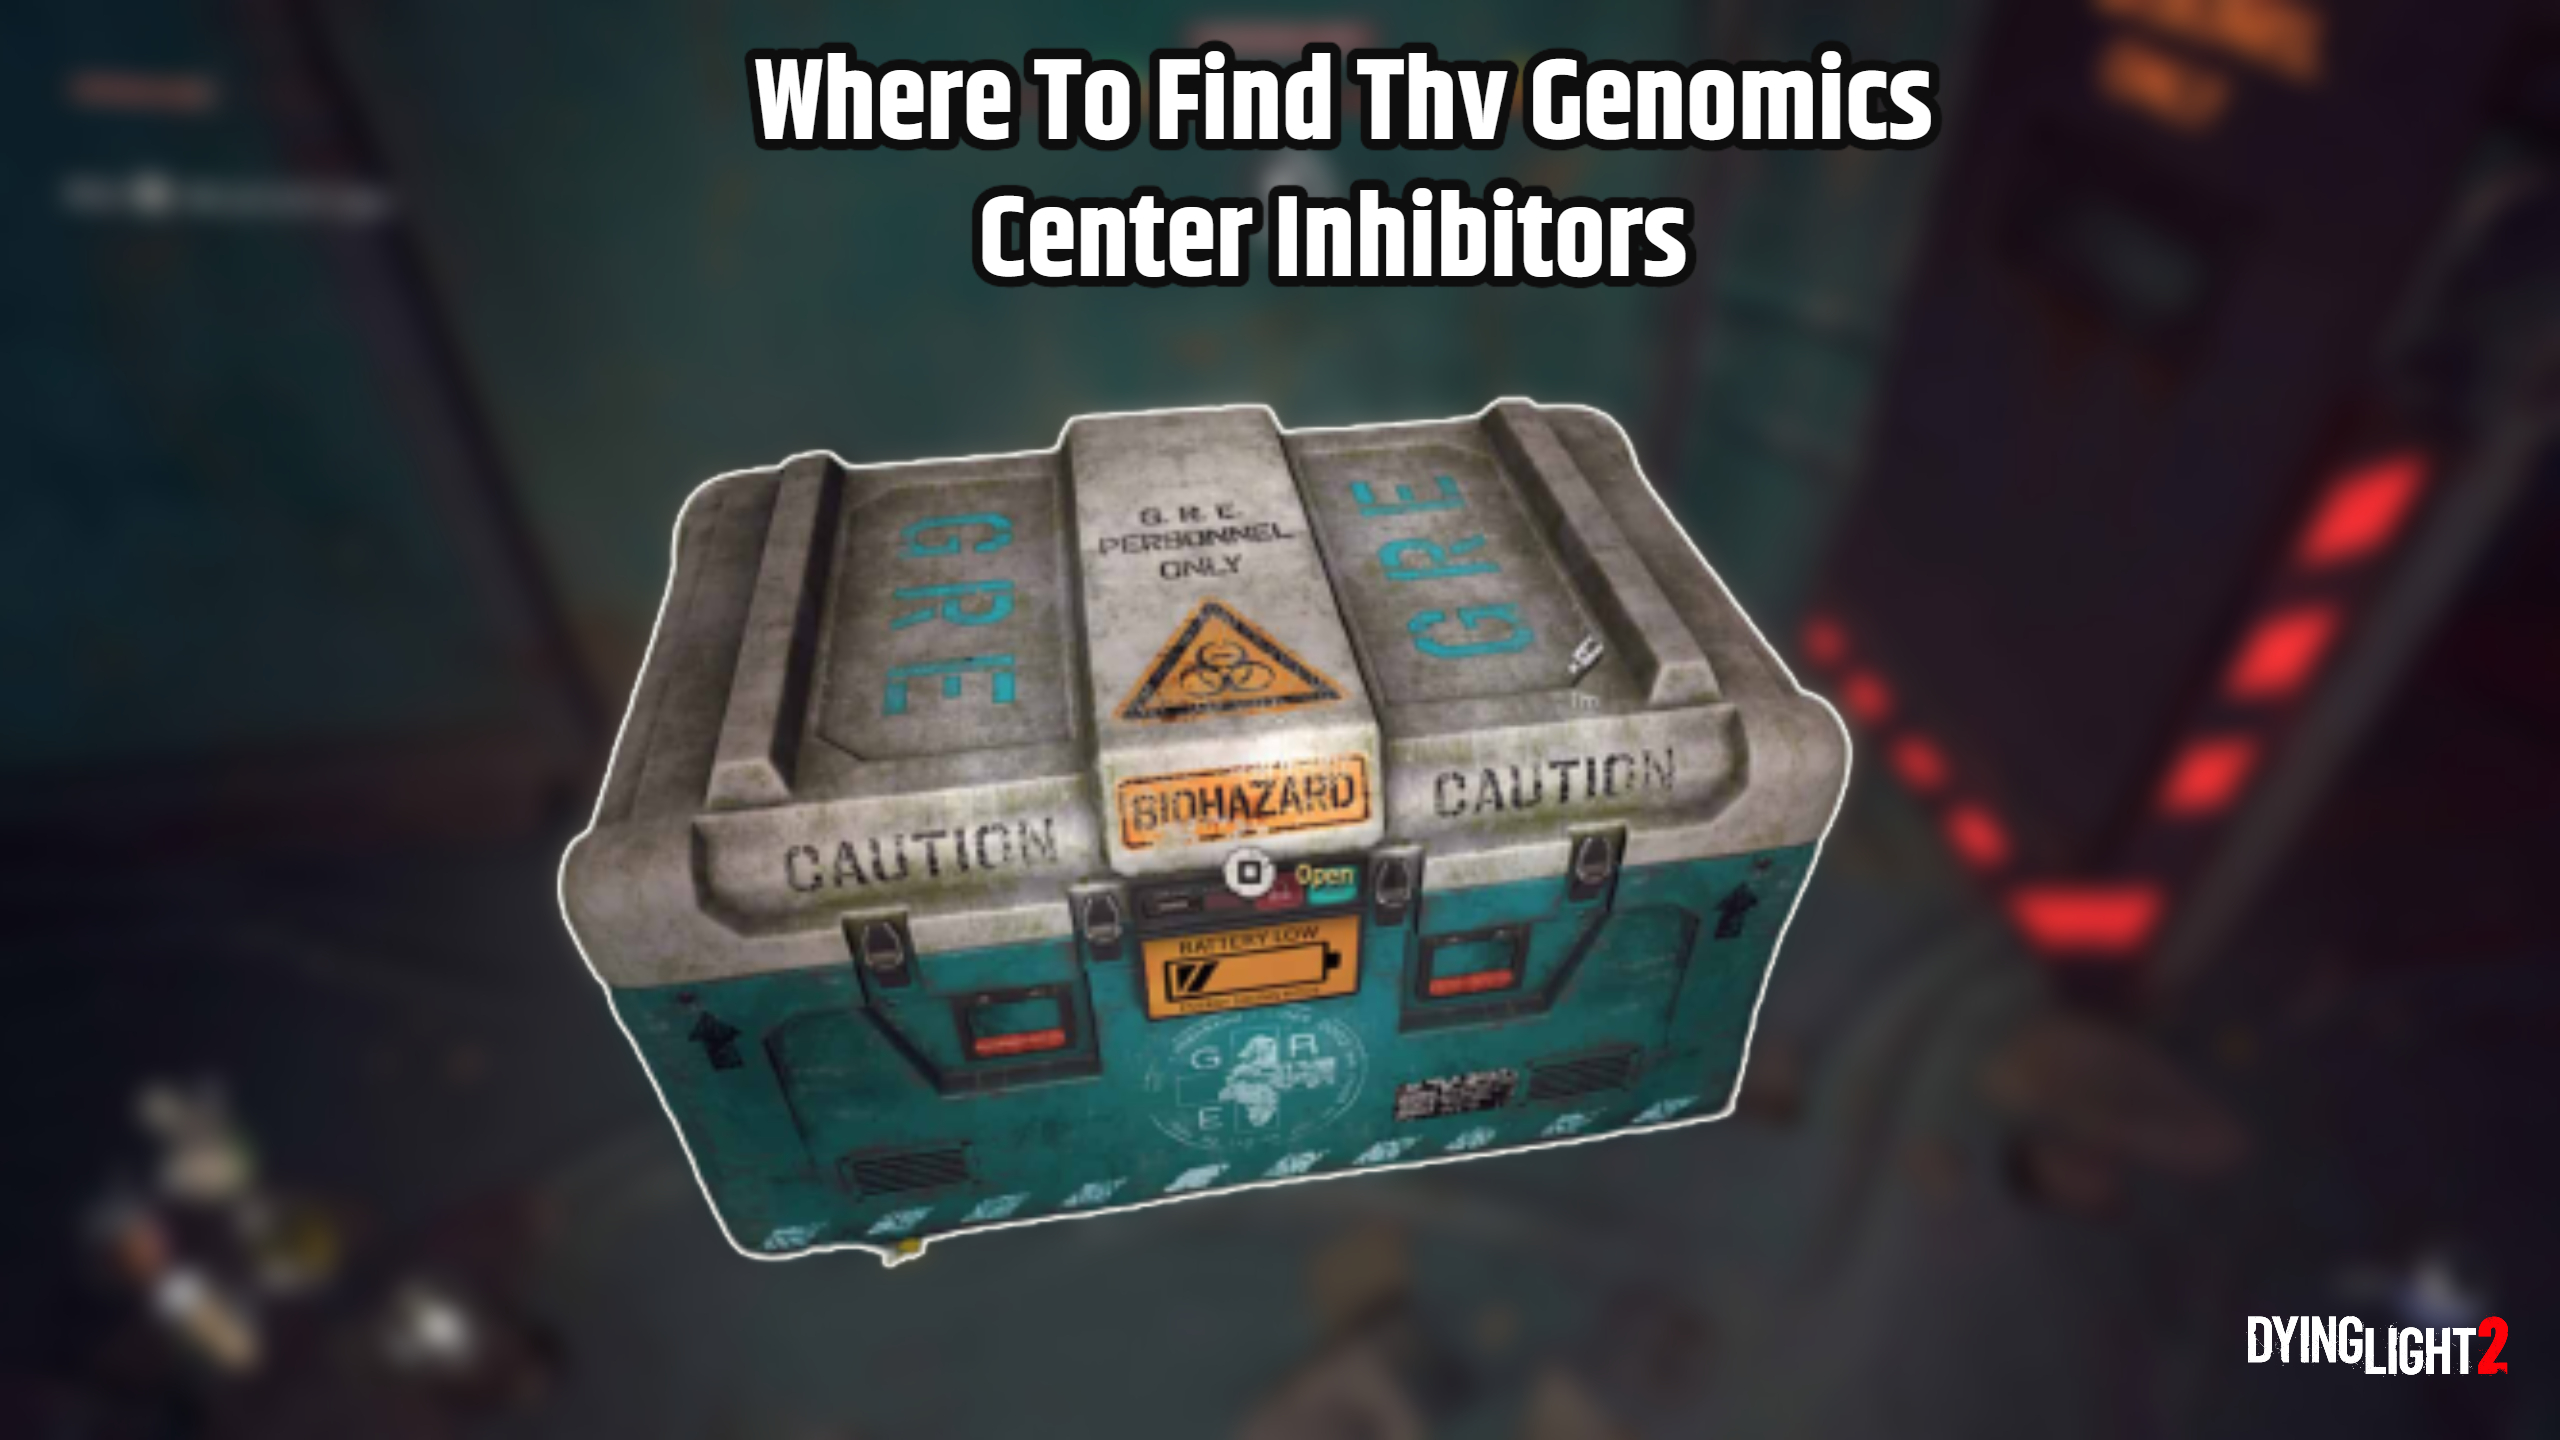 You are currently viewing Where To Find Thv Genomics Center Inhibitors In Dying Light 2